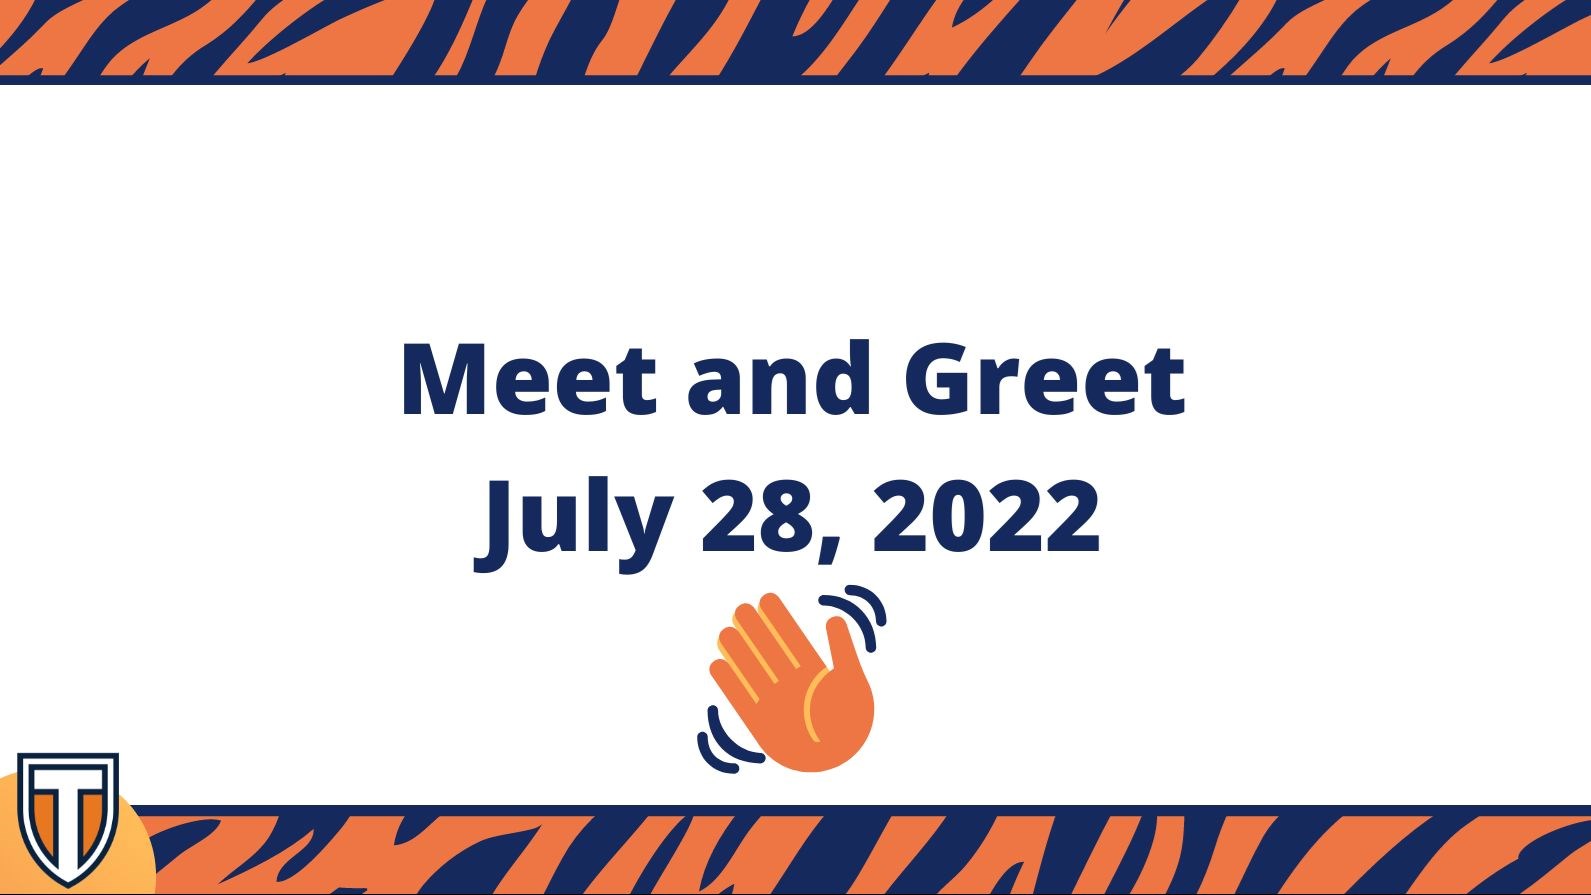 Meet and Greet July 28, 2022